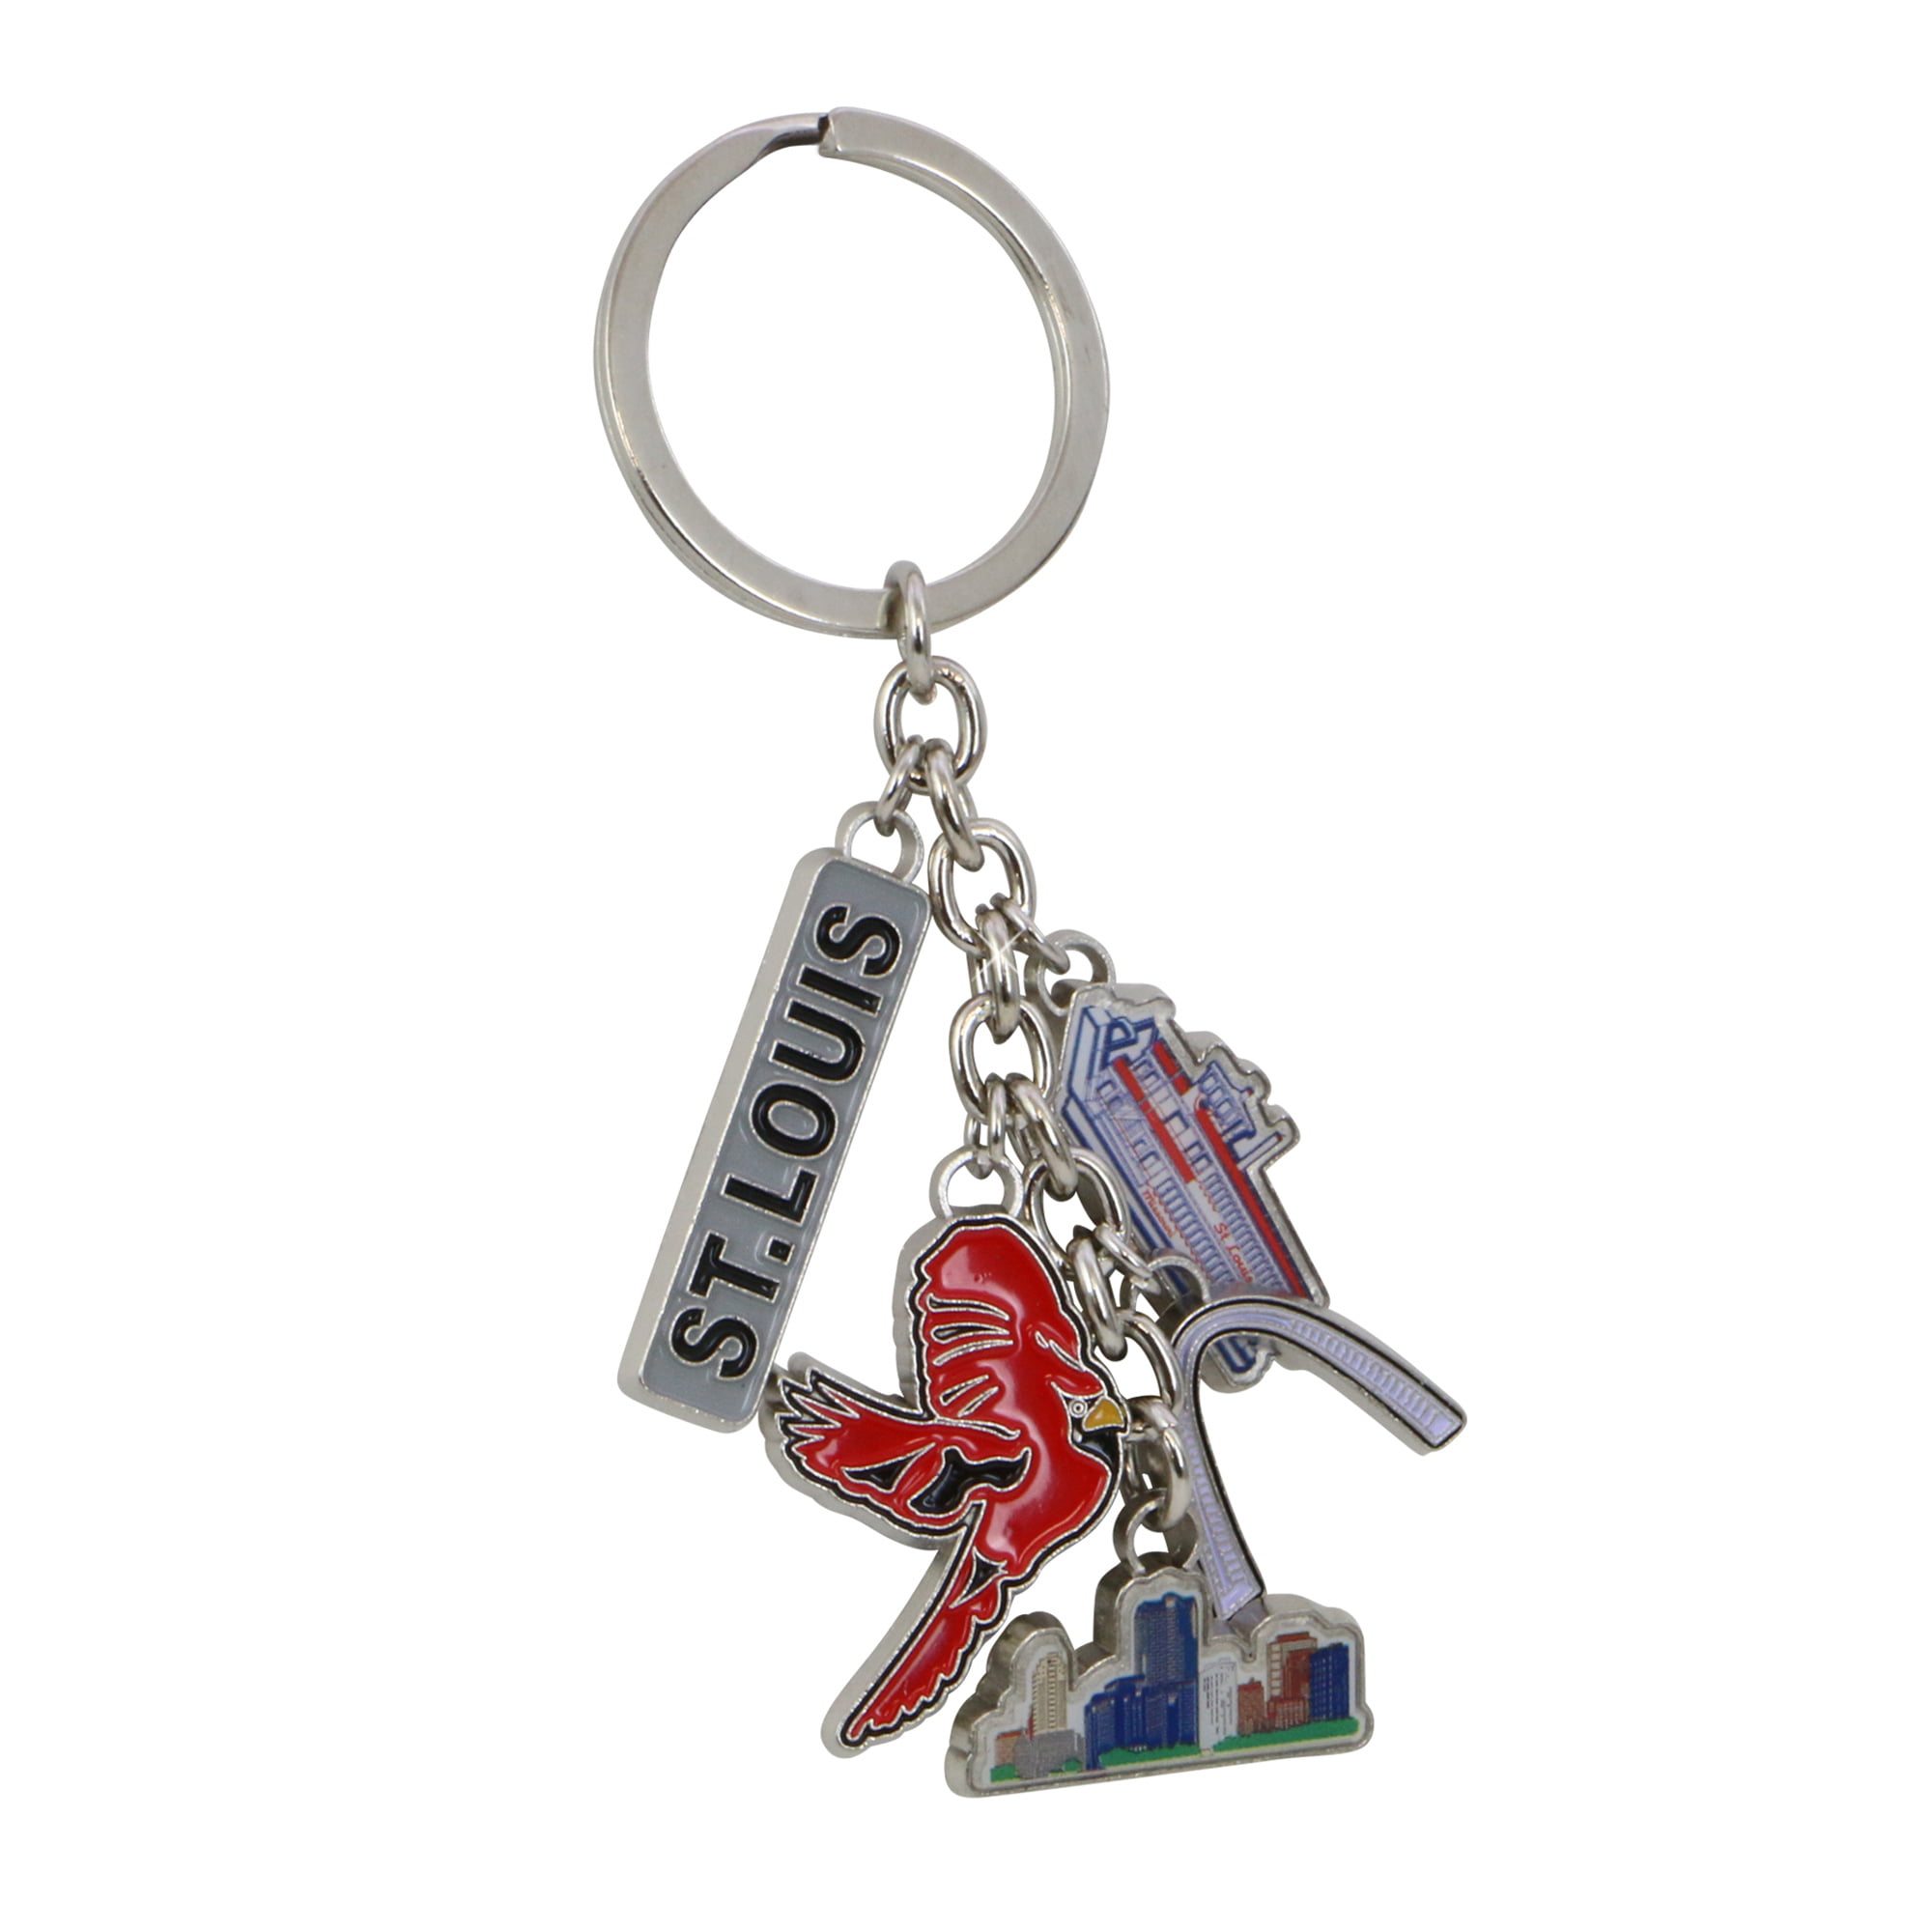 ST. LOUIS CARDINALS KEYCHAIN BALL 2 ROUND v2 LICENSED NEW MLB CHARM PULL